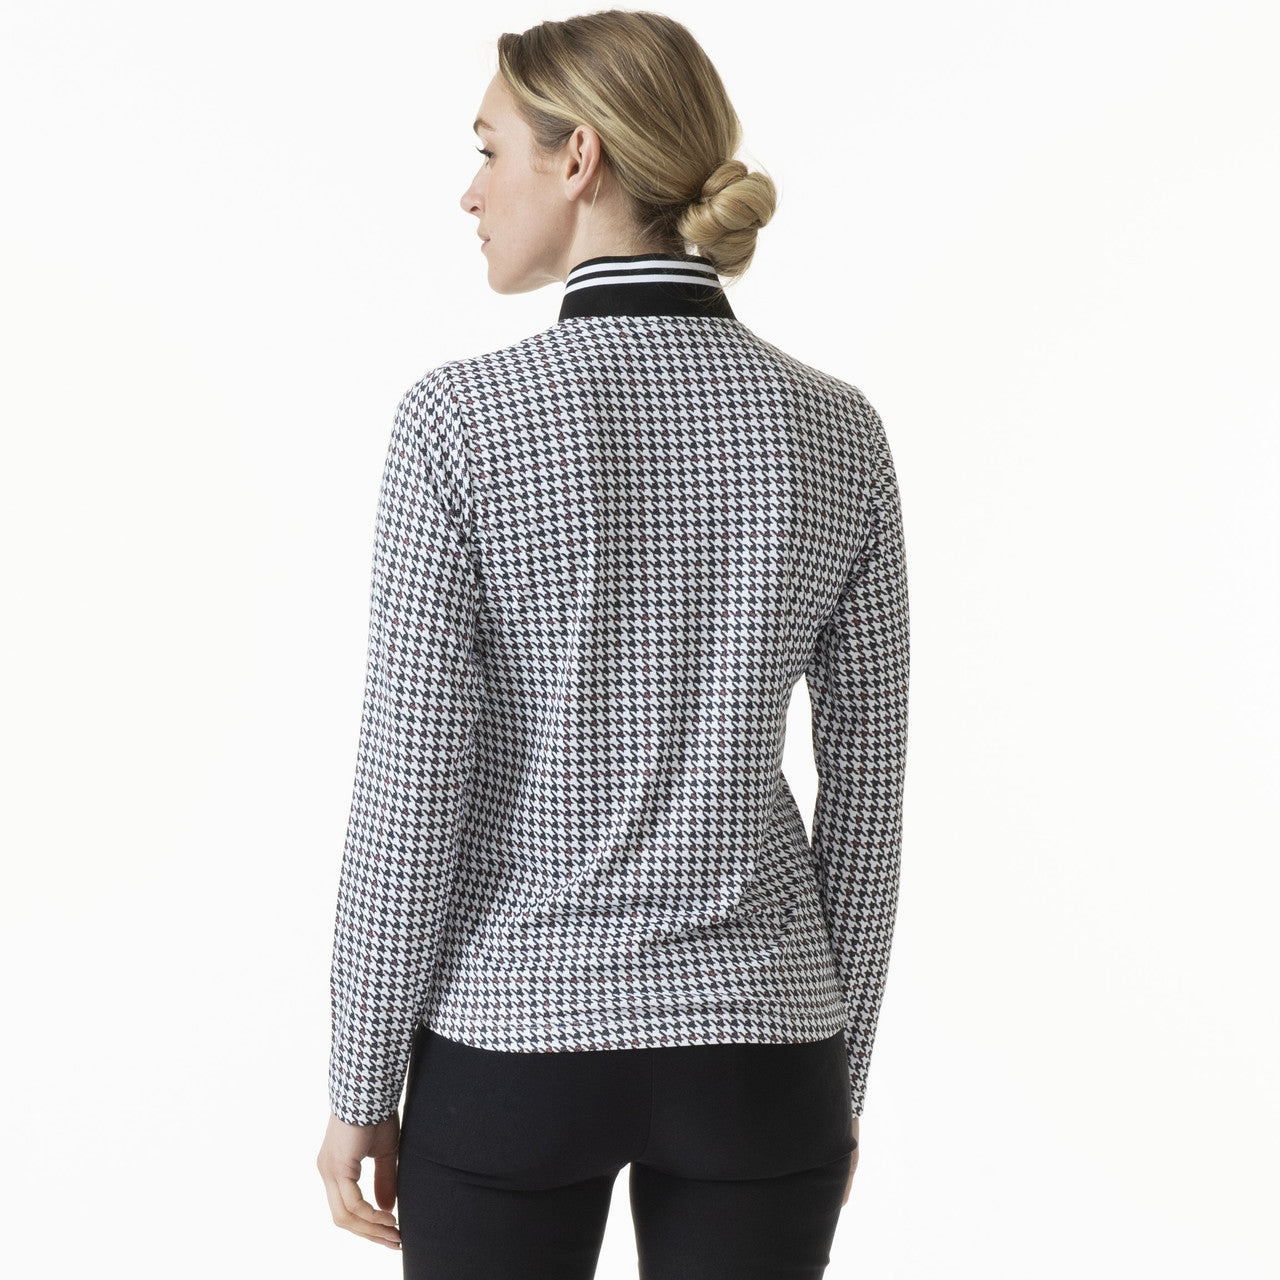 Daily Sports- Long Sleeve Fay Houndstooth Mock Neck Top (Style#: 353/132/999)